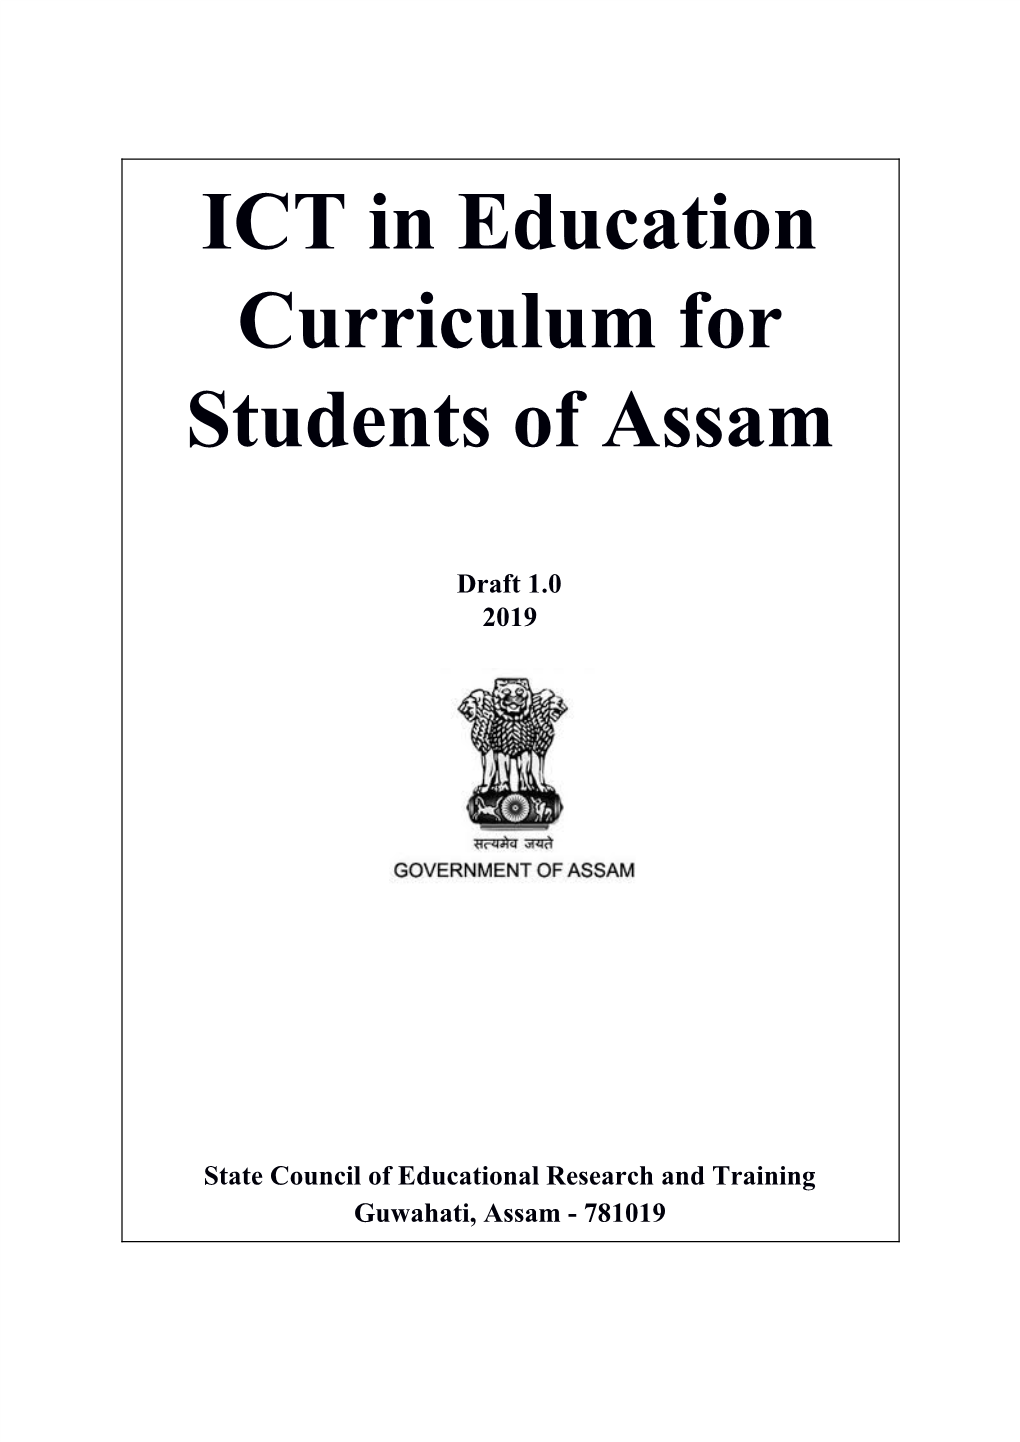 ICT in Education Curriculum for Students of Assam